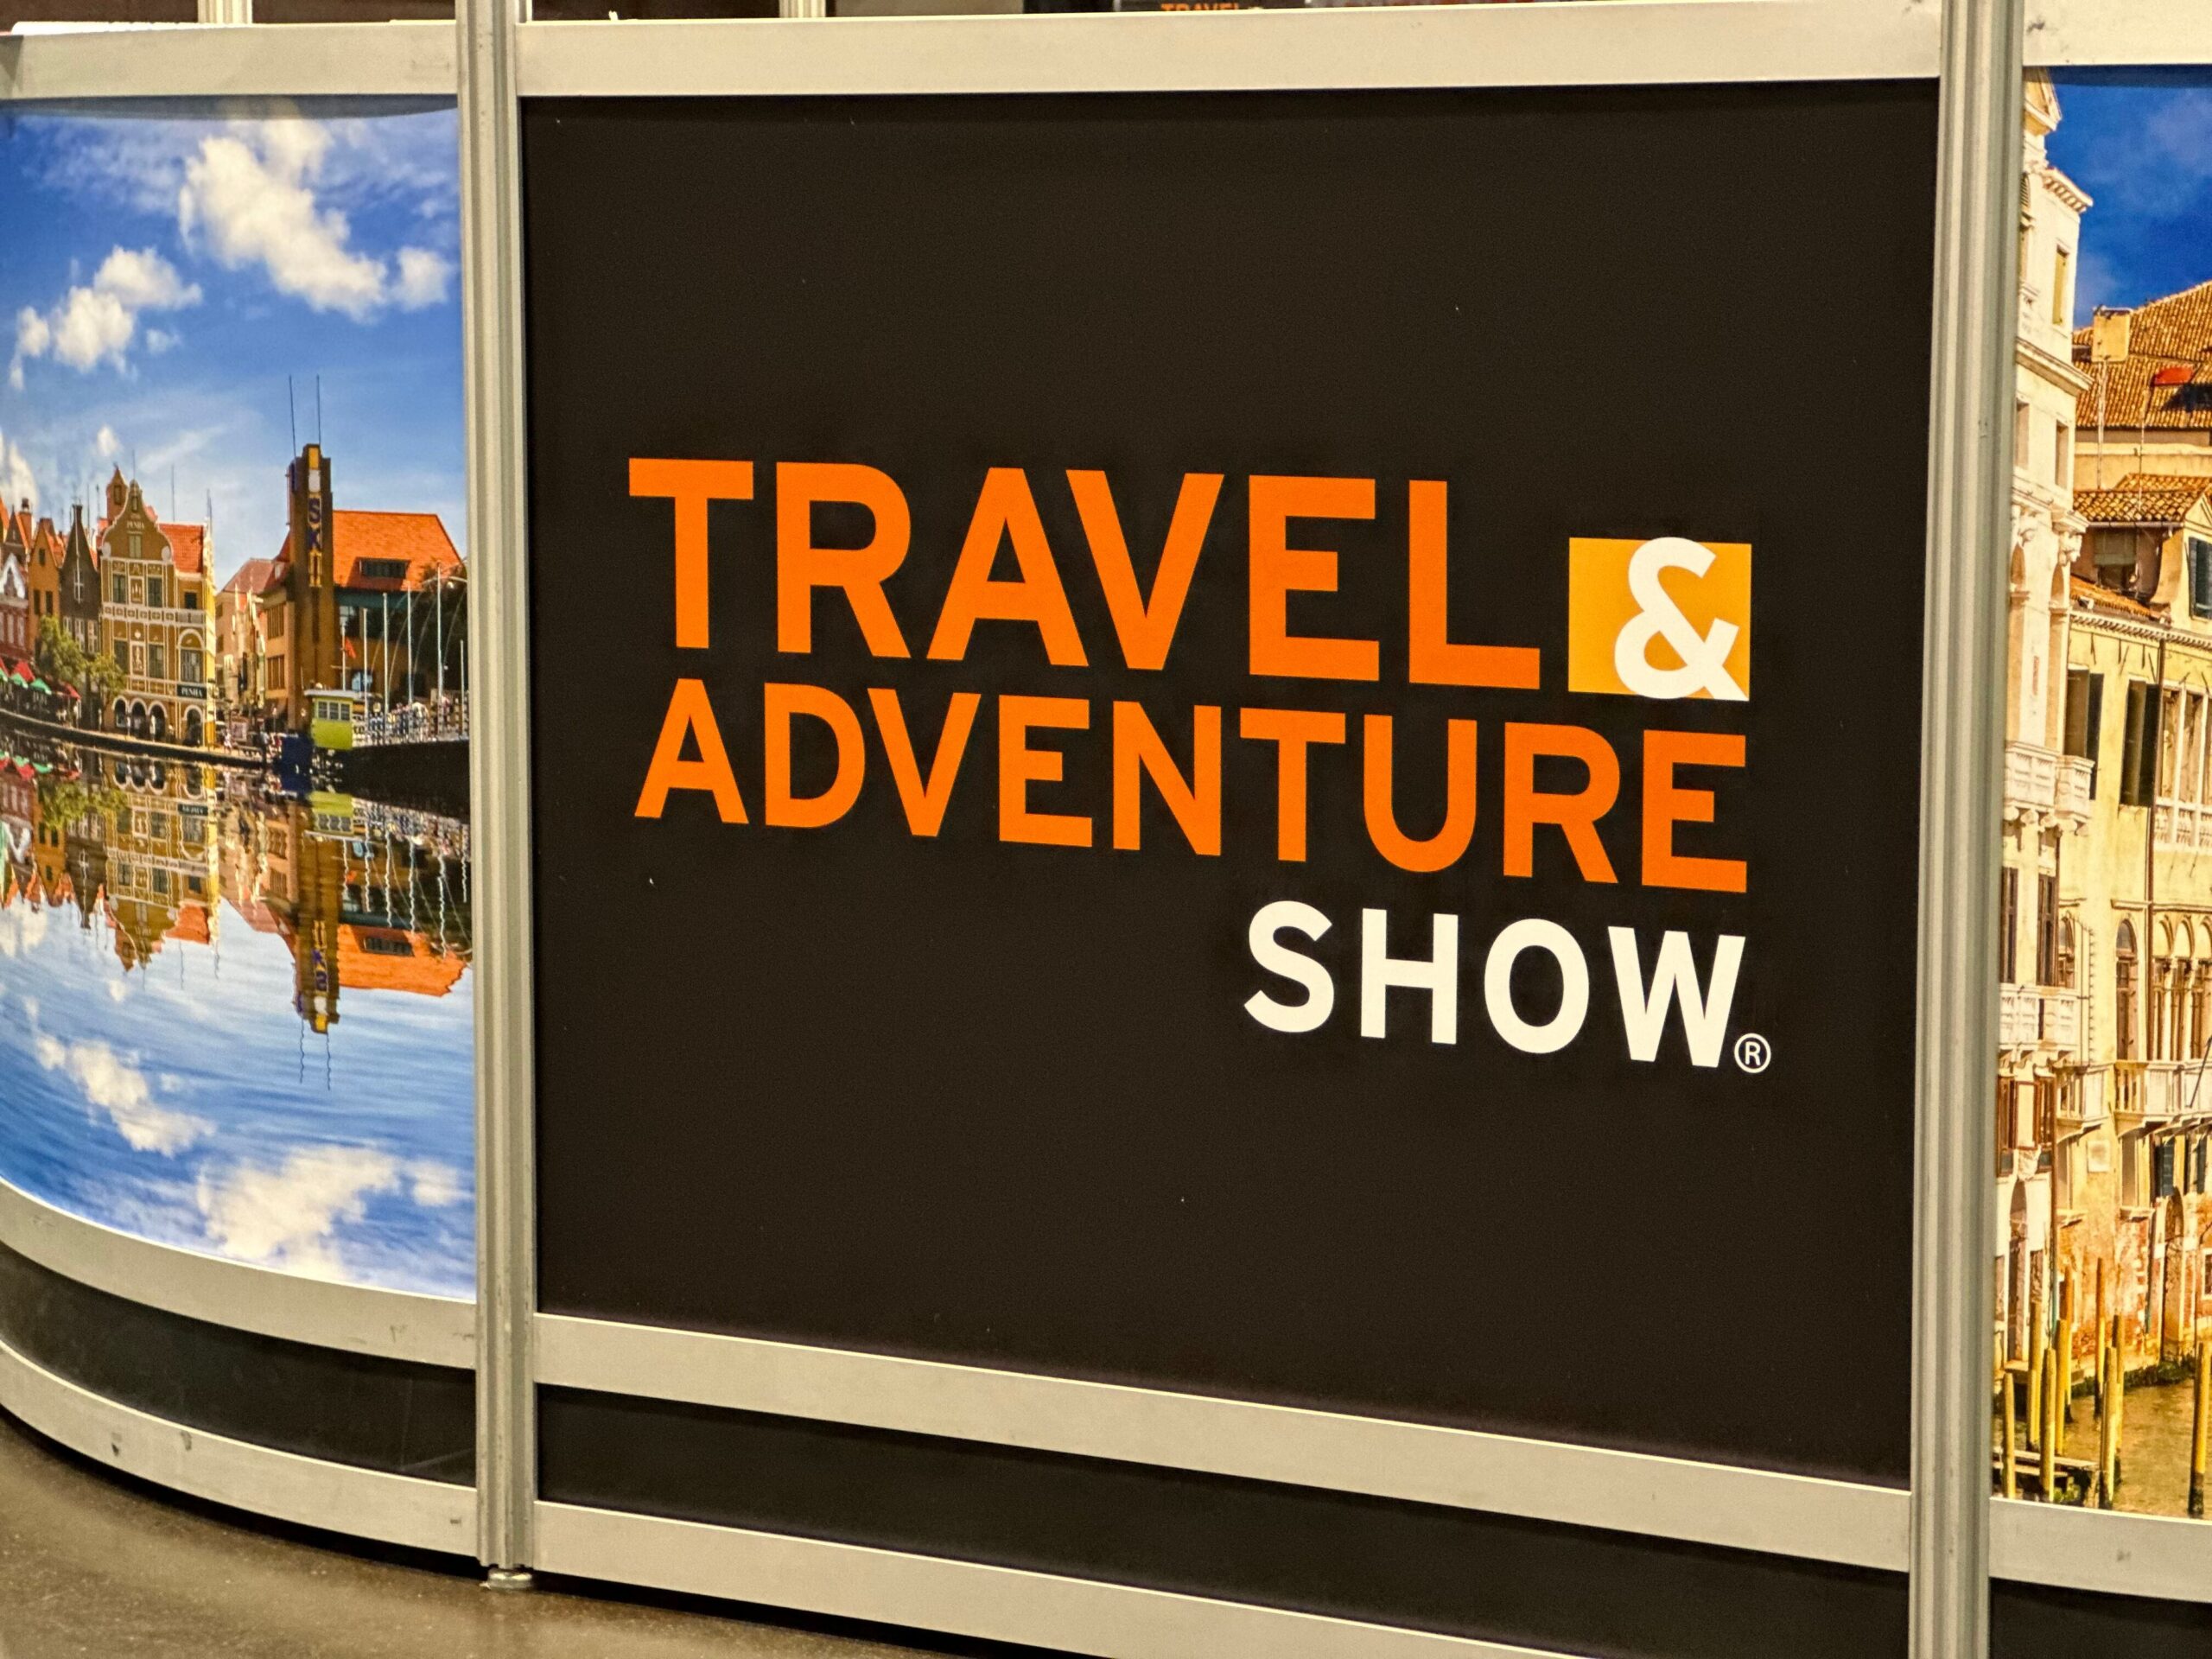 The Bay Area Travel & Adventure Show Inspired Travel Enthusiasts To Discover Global Excursions & Vacation Experiences